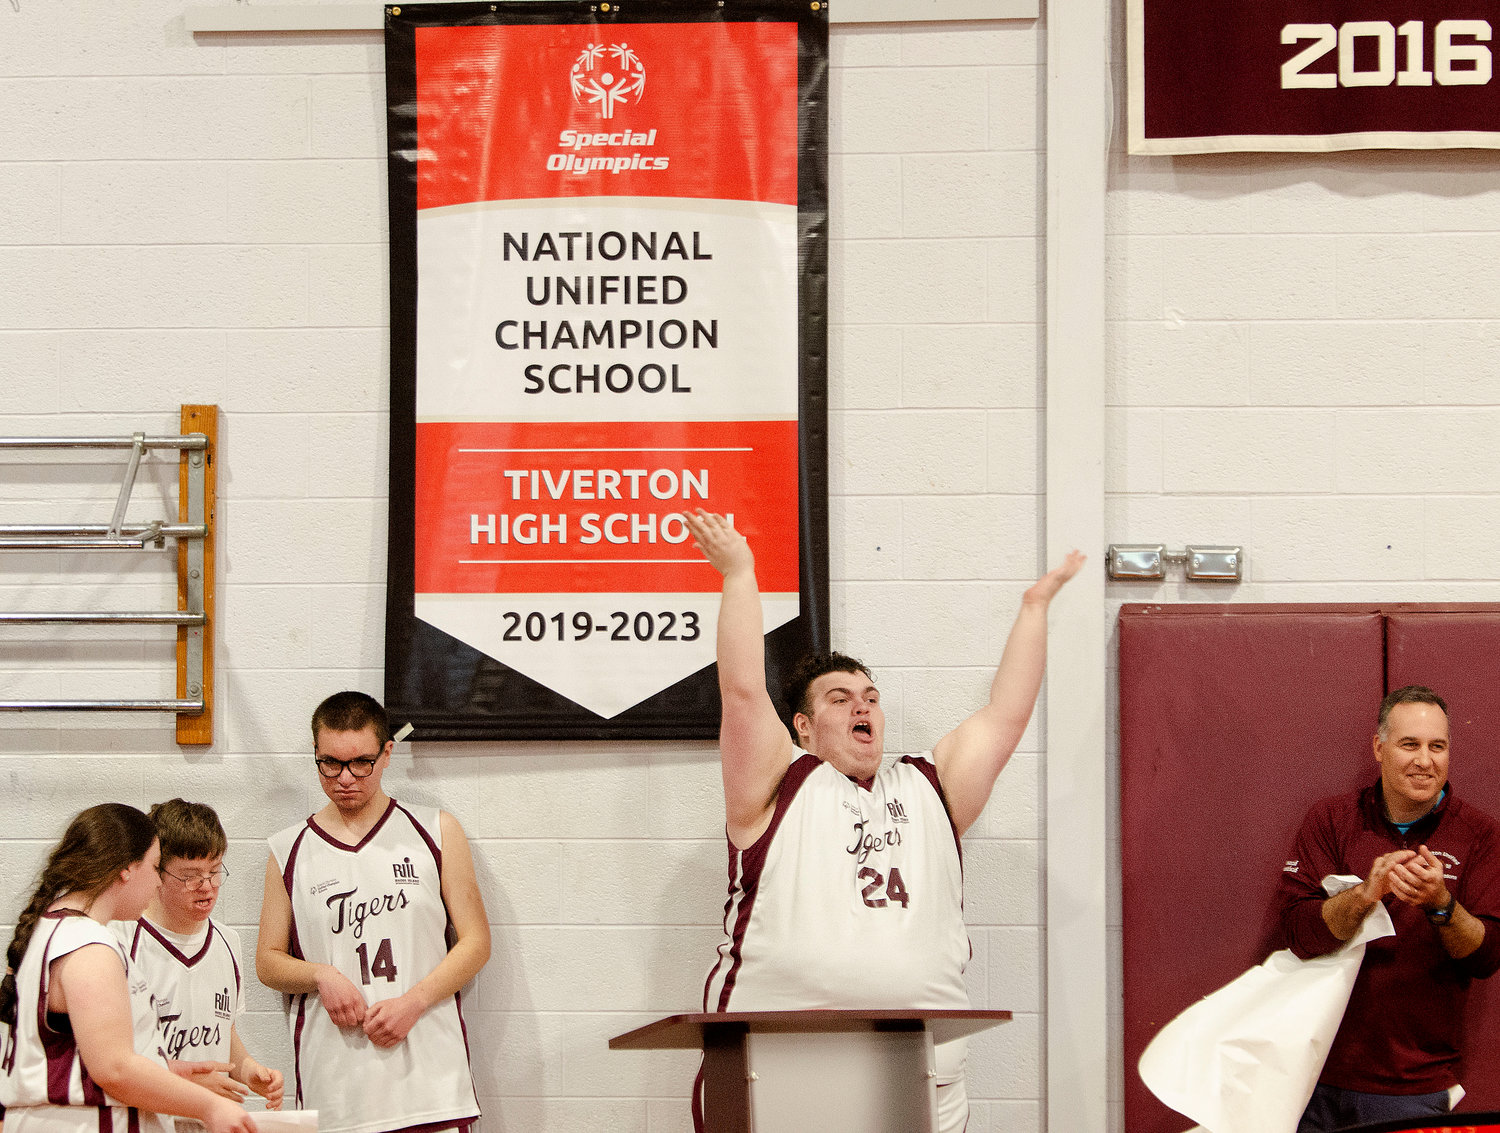 Aidan McCrosson (right) and coach Dave Landoch (right) and the team celebrate as they unveil their new sign saying that Tiverton is a national unifield champion High School.  